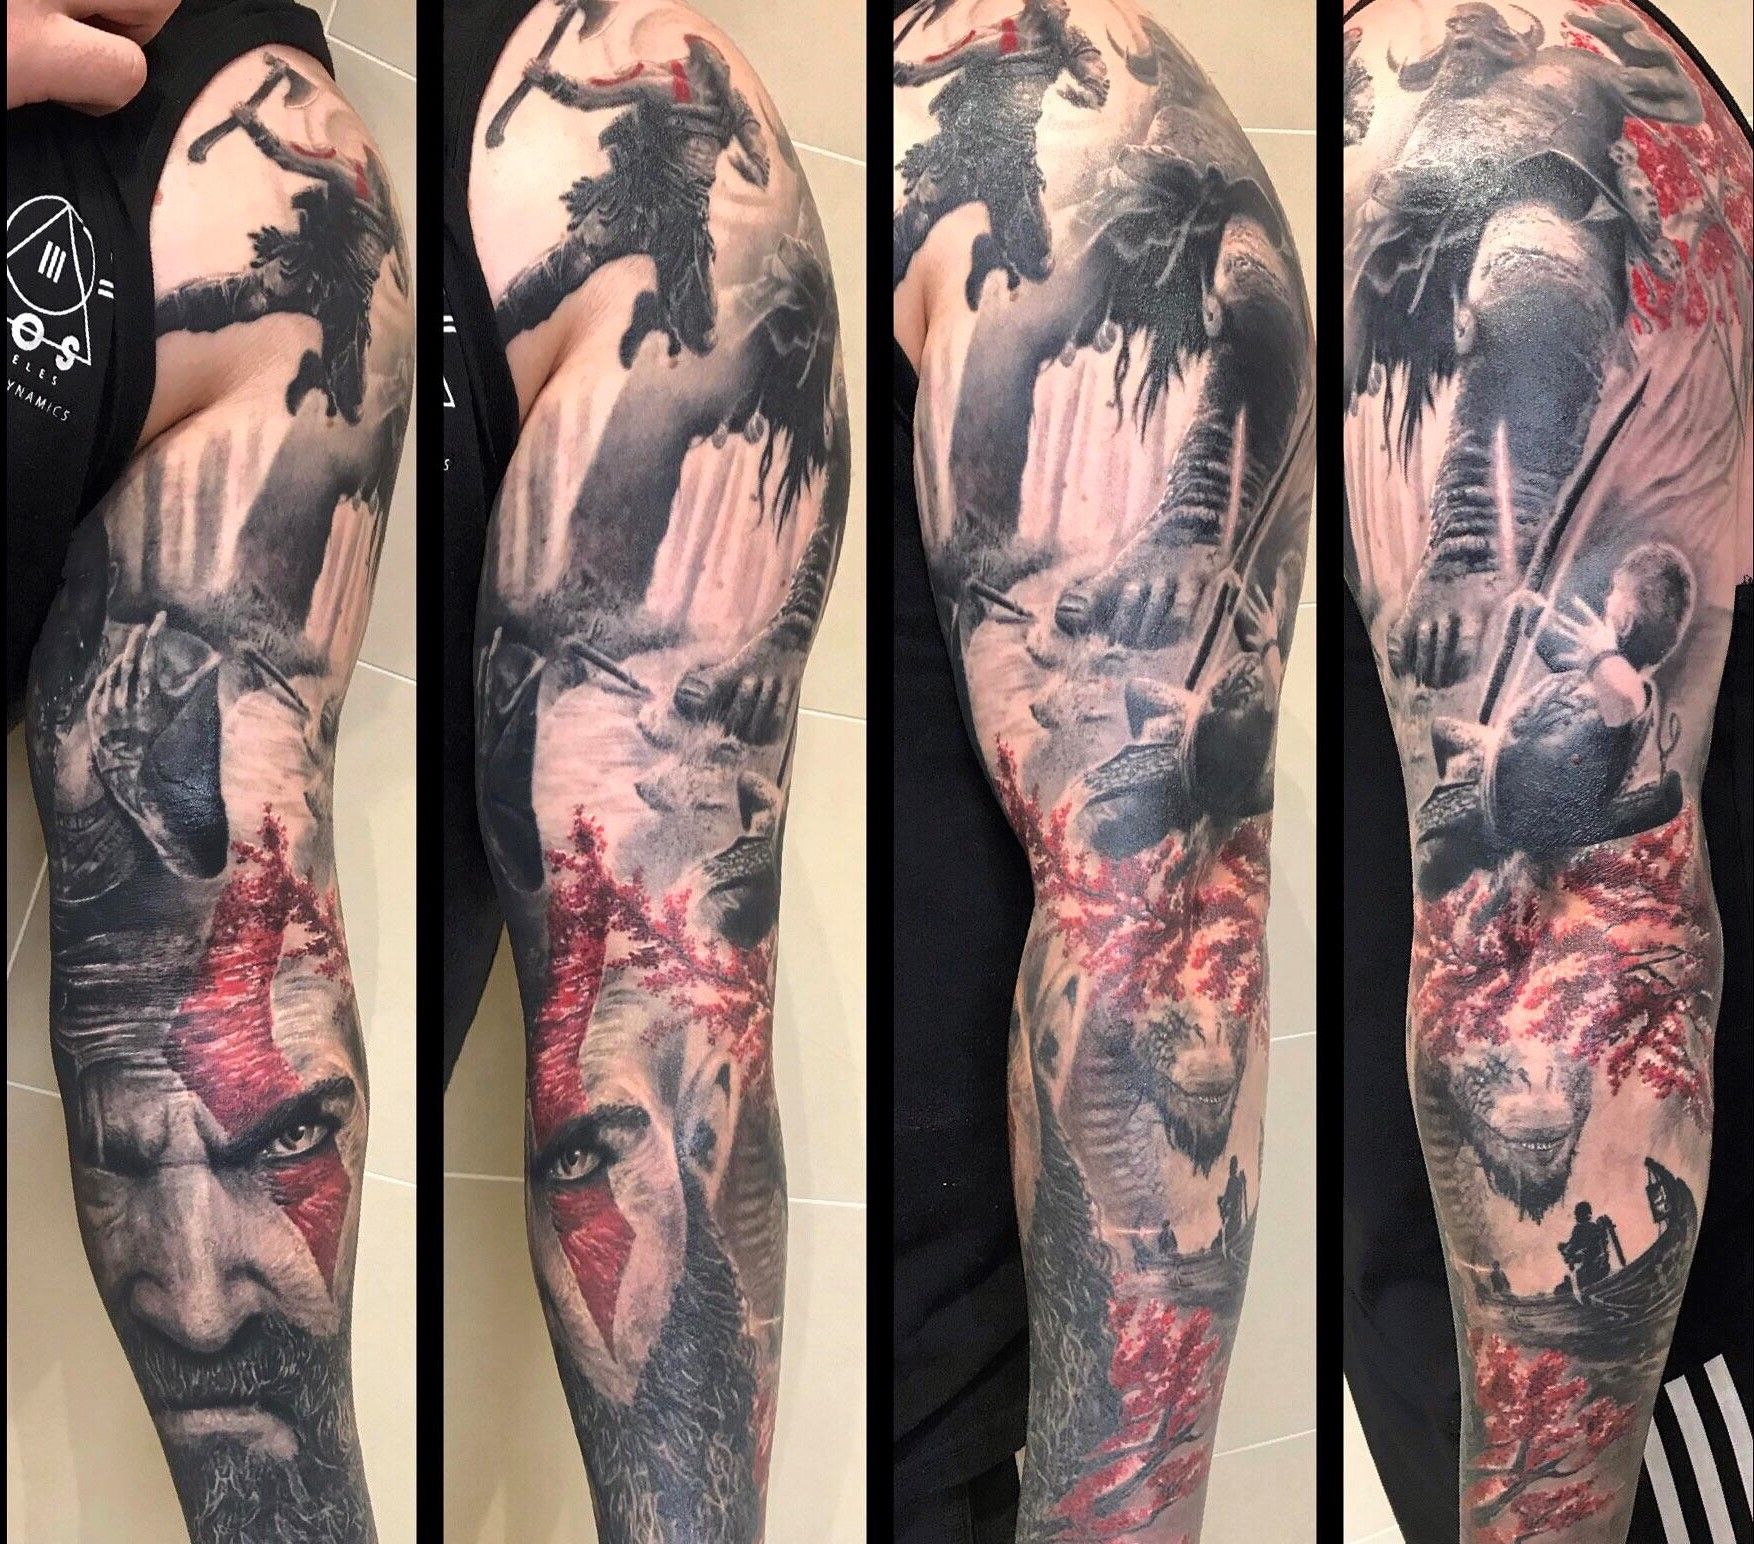 Full Body Kratos Tattoo - A Comprehensive Tattoo Covering